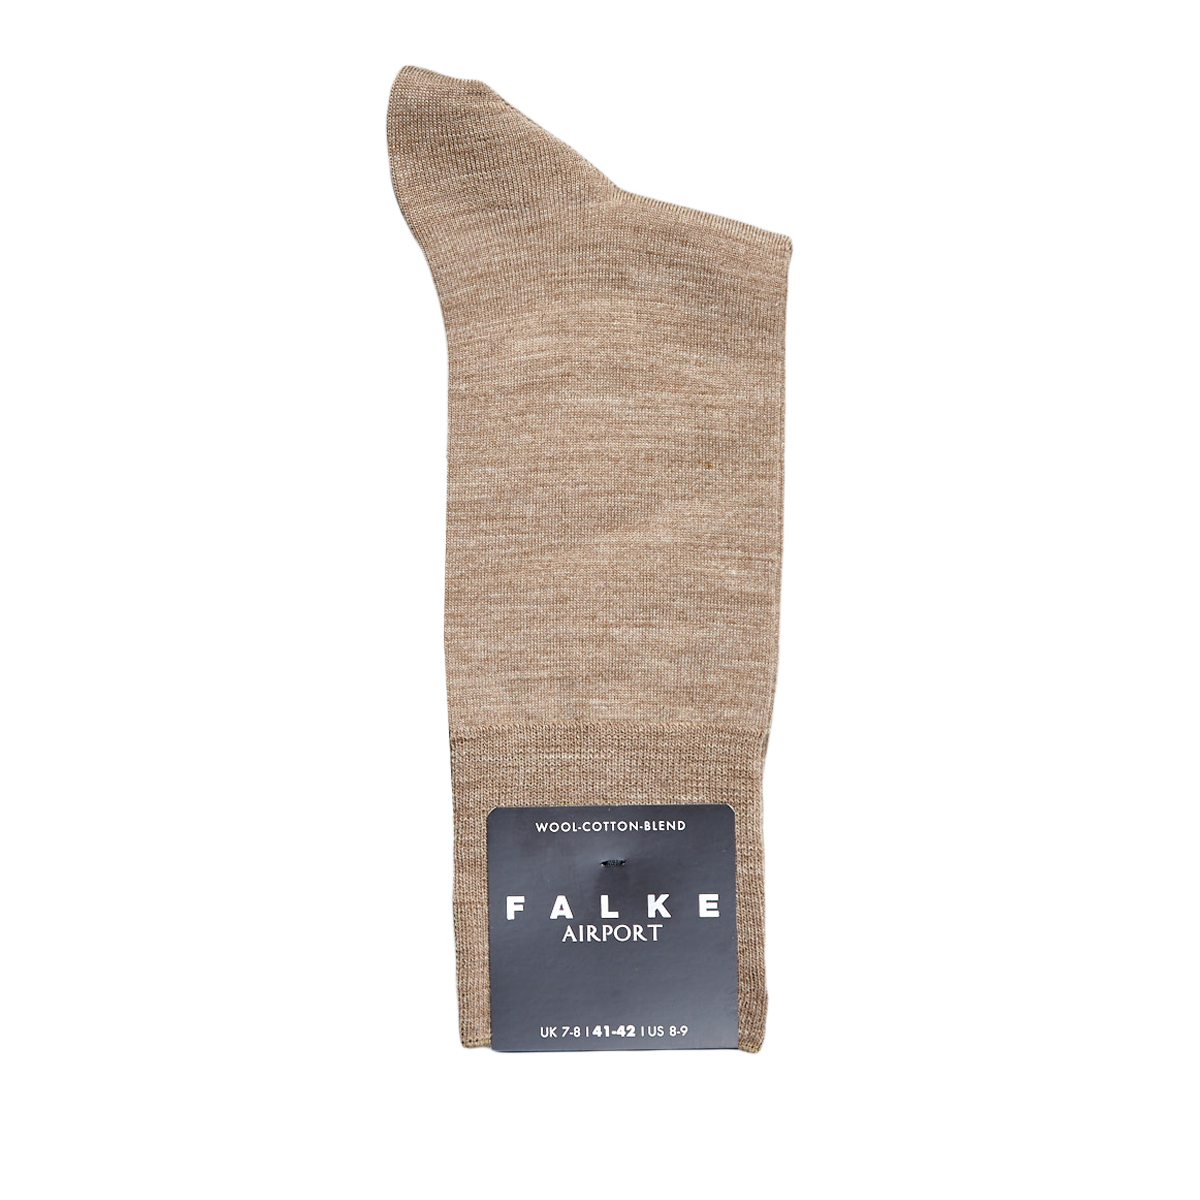 A pair of Falke Nutmeg Airport Wool Cotton Socks with the word pace on them, made of merino wool for temperature regulation.